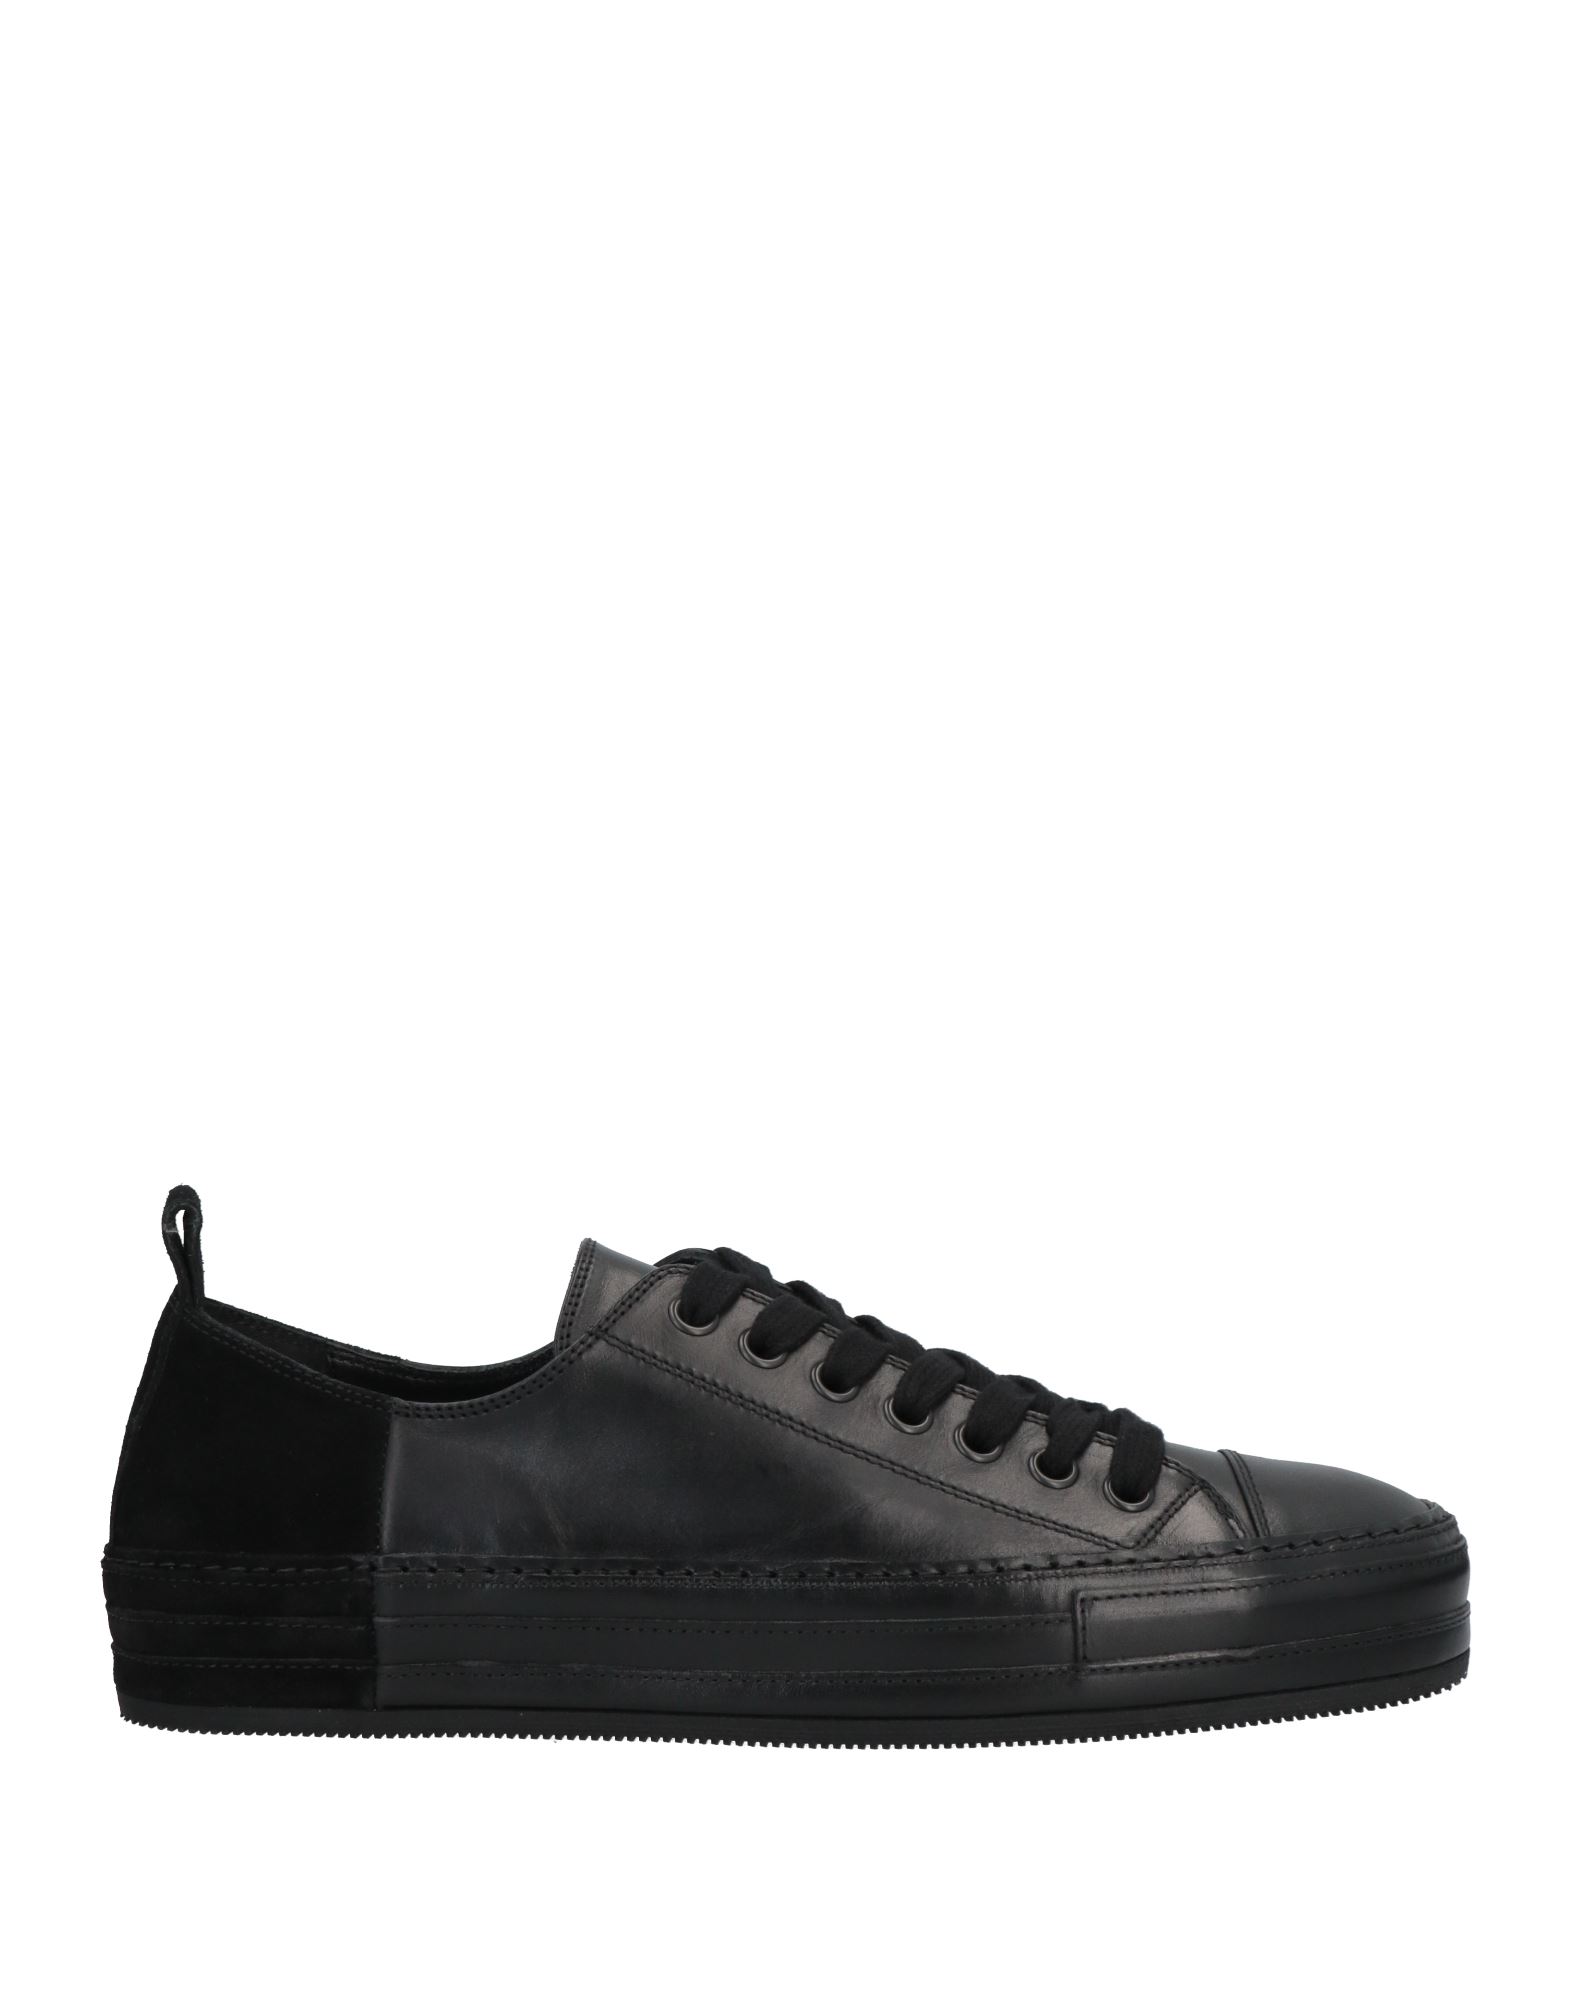 Shop Ann Demeulemeester Man Sneakers Black Size 7 Soft Leather